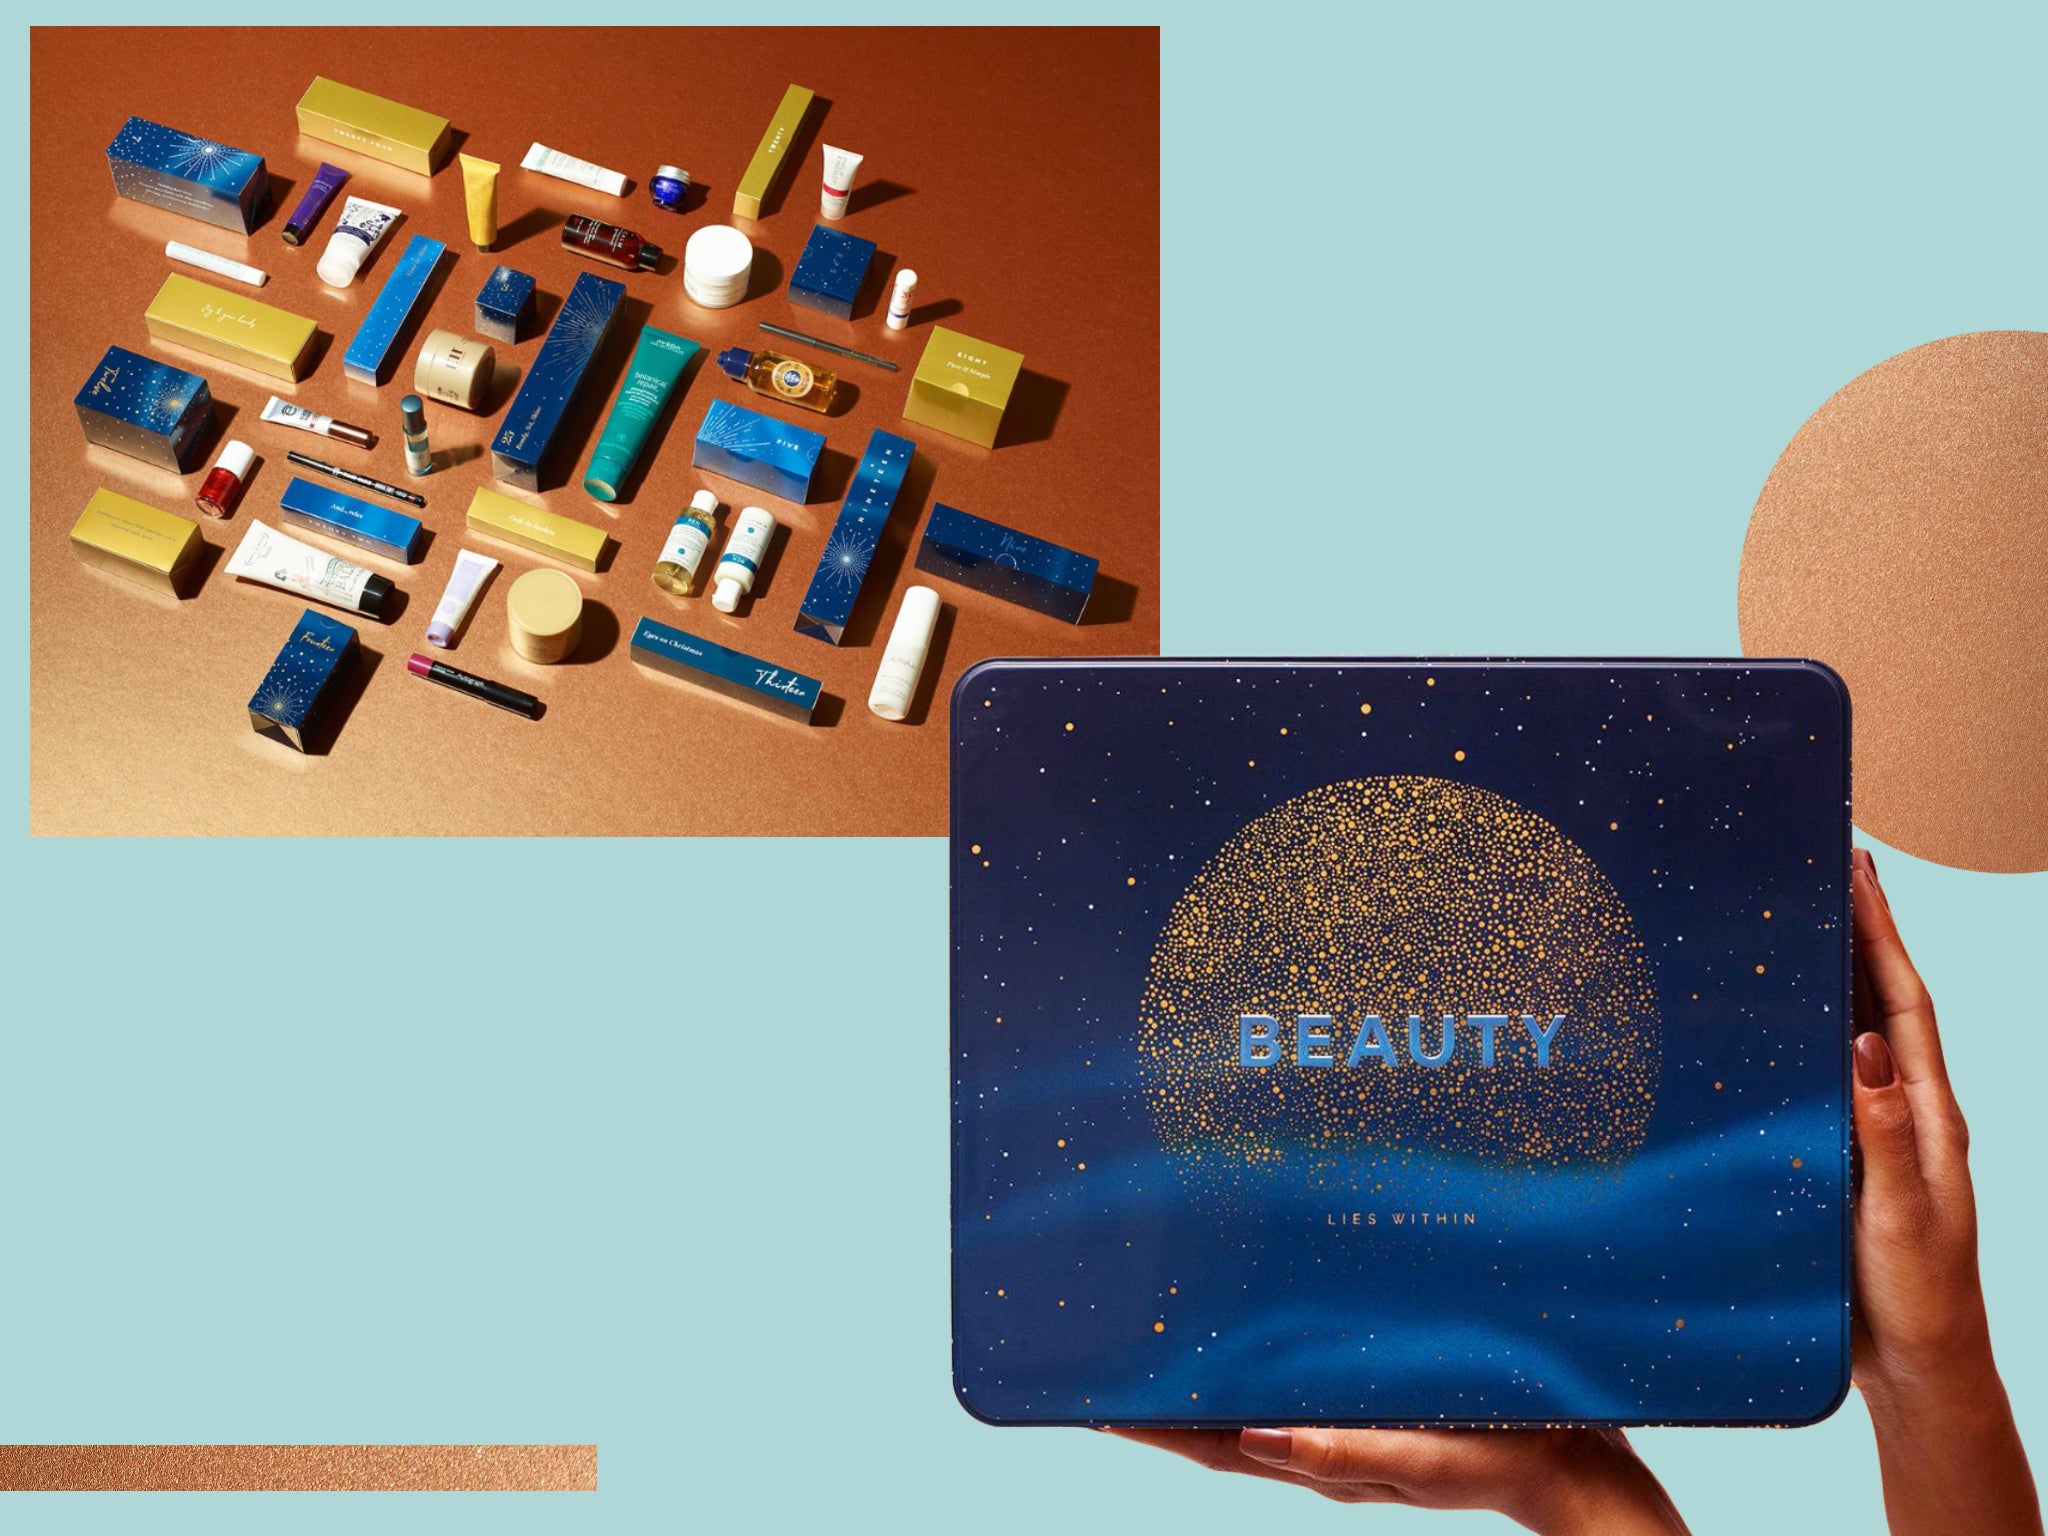 2021's finest beauty advent calendars to give and get